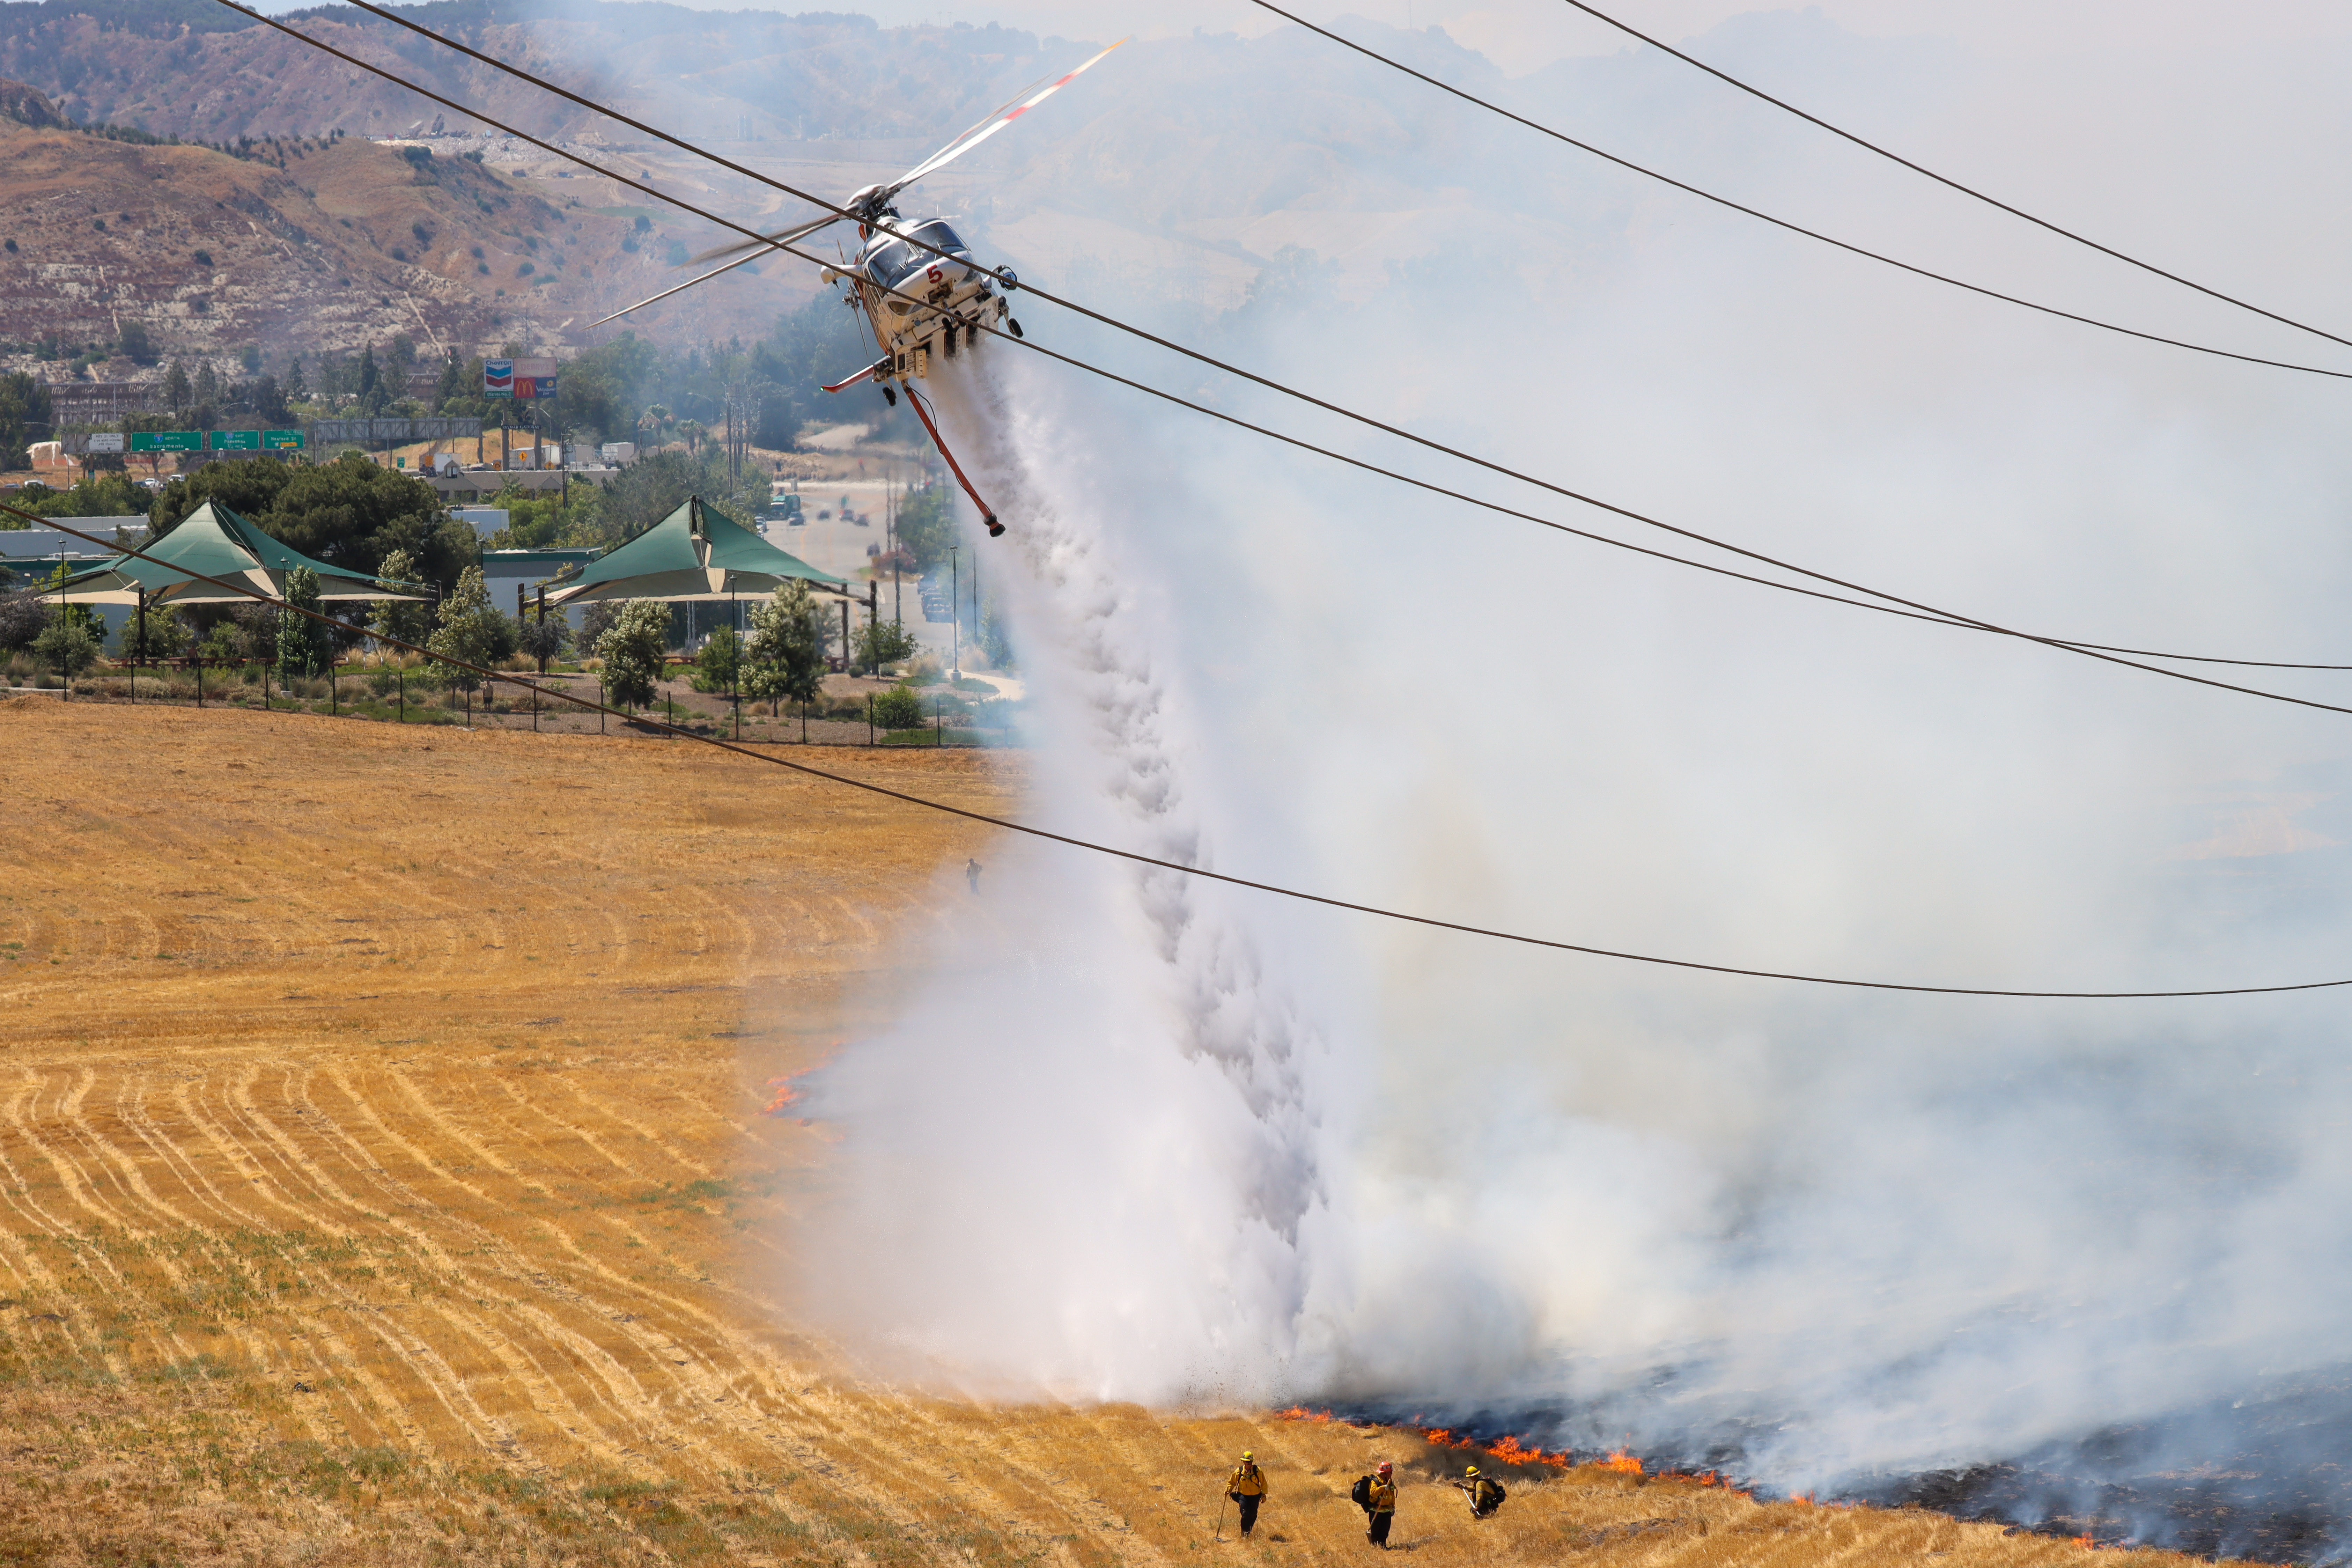 Helicopter dropping water on grass fire, with firefighters on the ground nearby